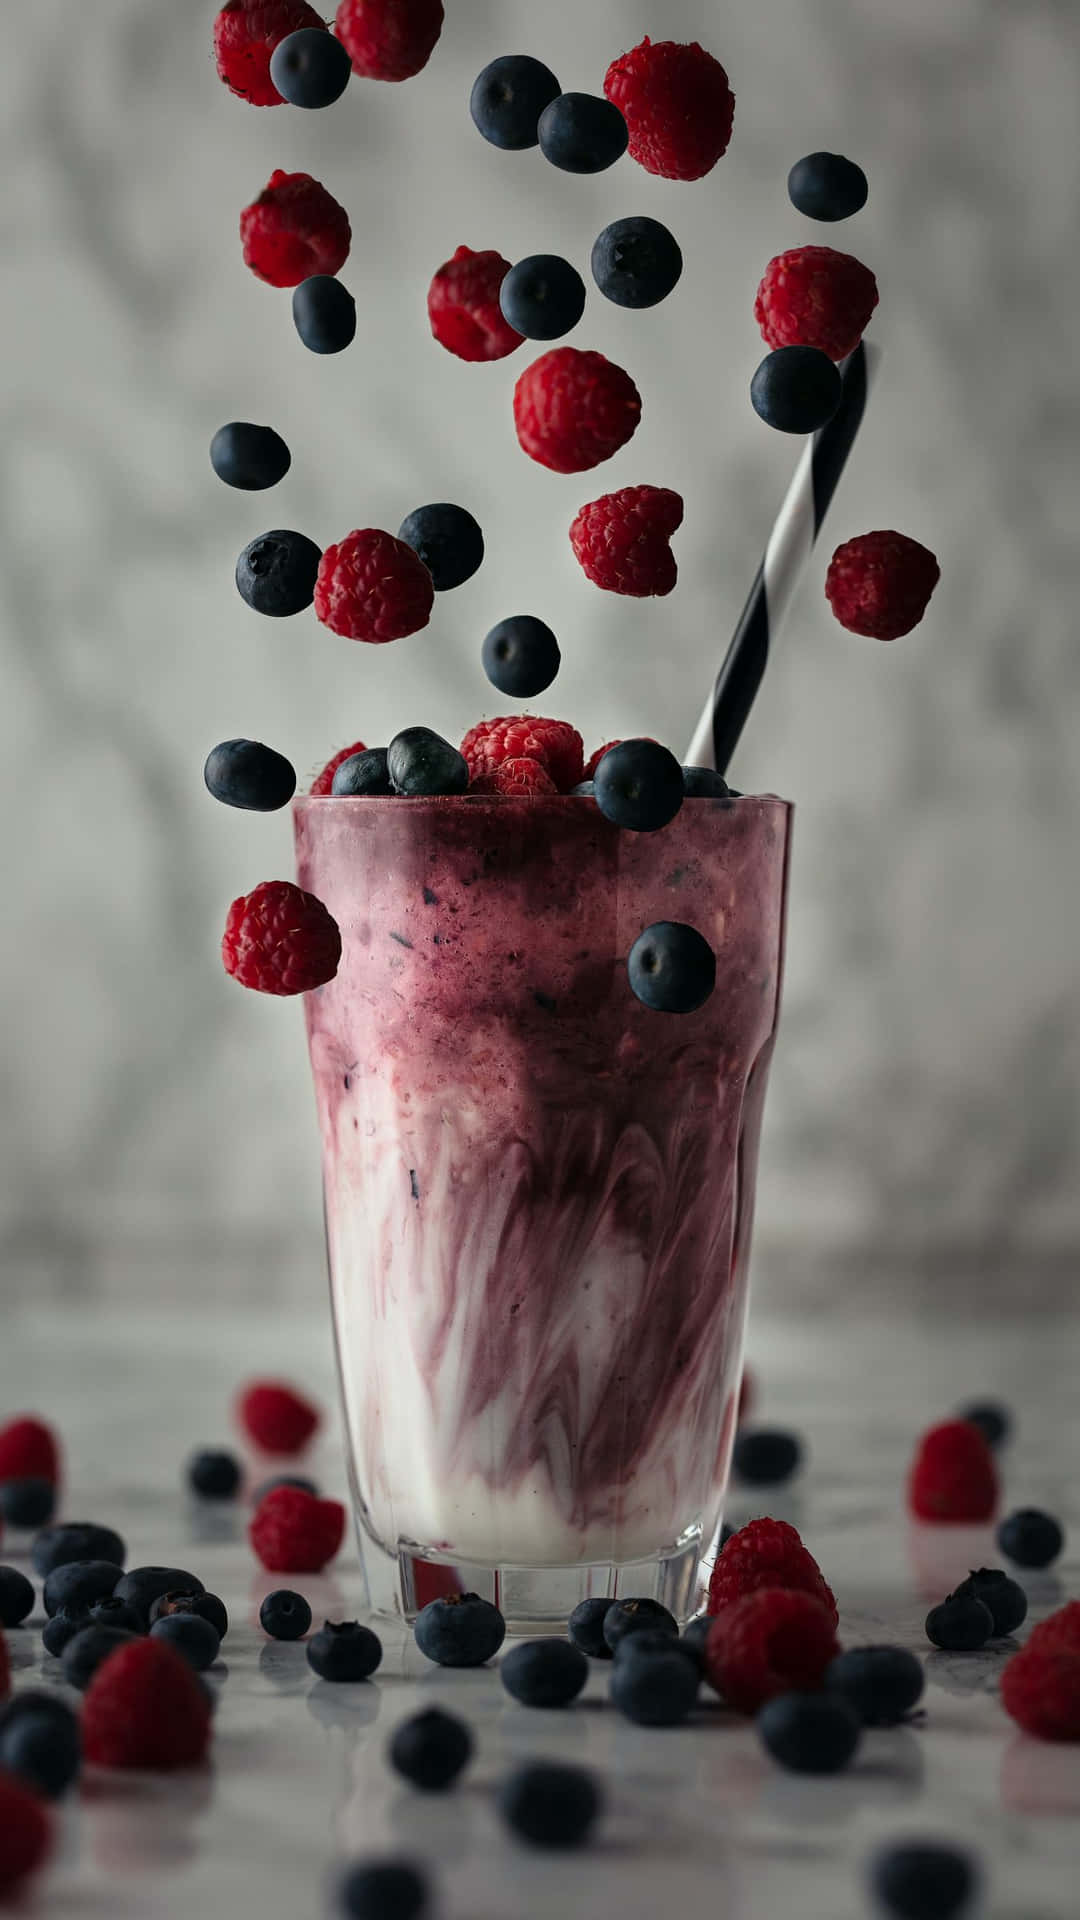 A Cup Of Yogurt With Berries Falling From It